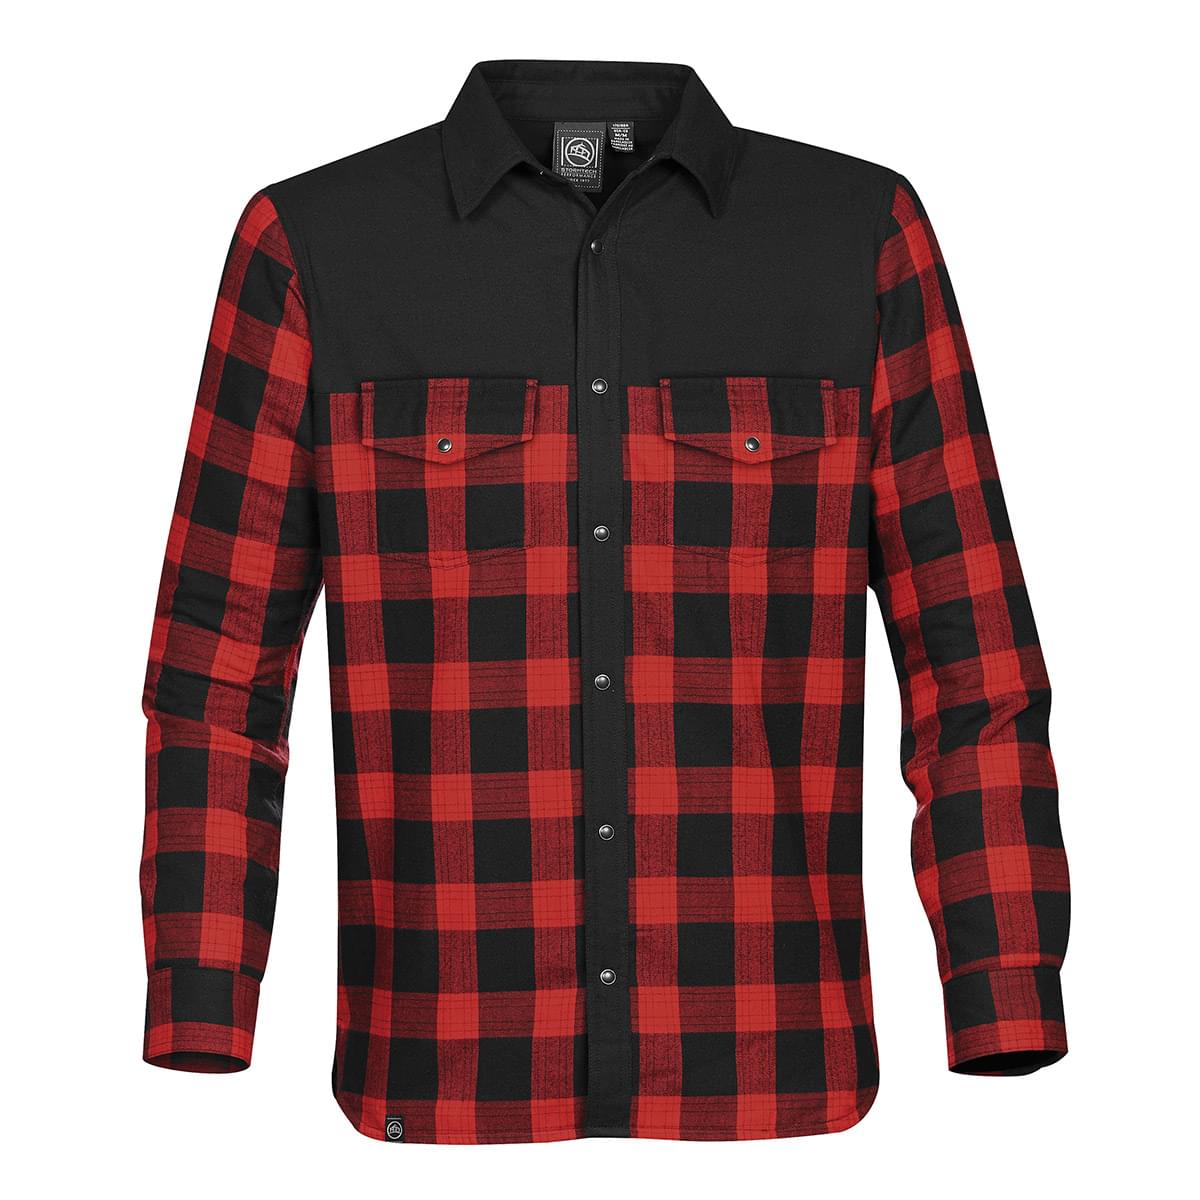 Men's Classic Thermal Shirts Warm Fleece Lined Plaid Flannel Shirt